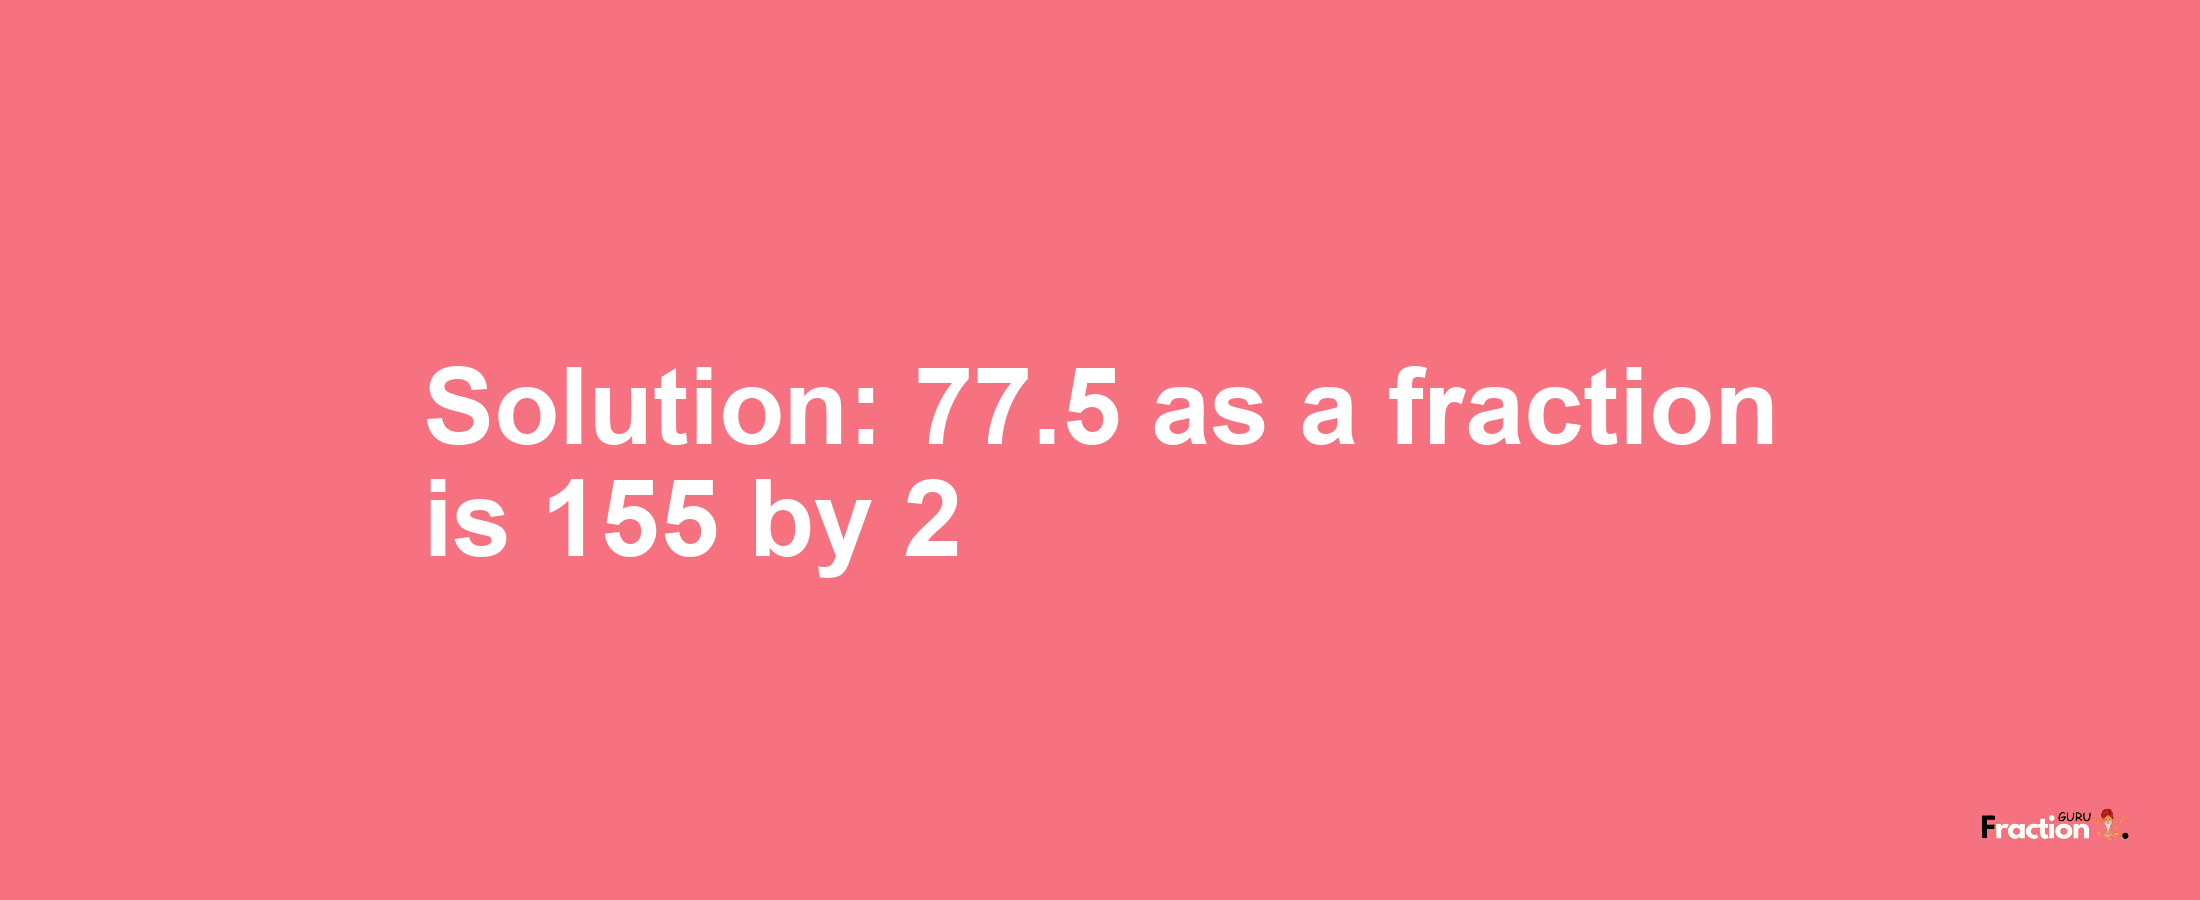 Solution:77.5 as a fraction is 155/2